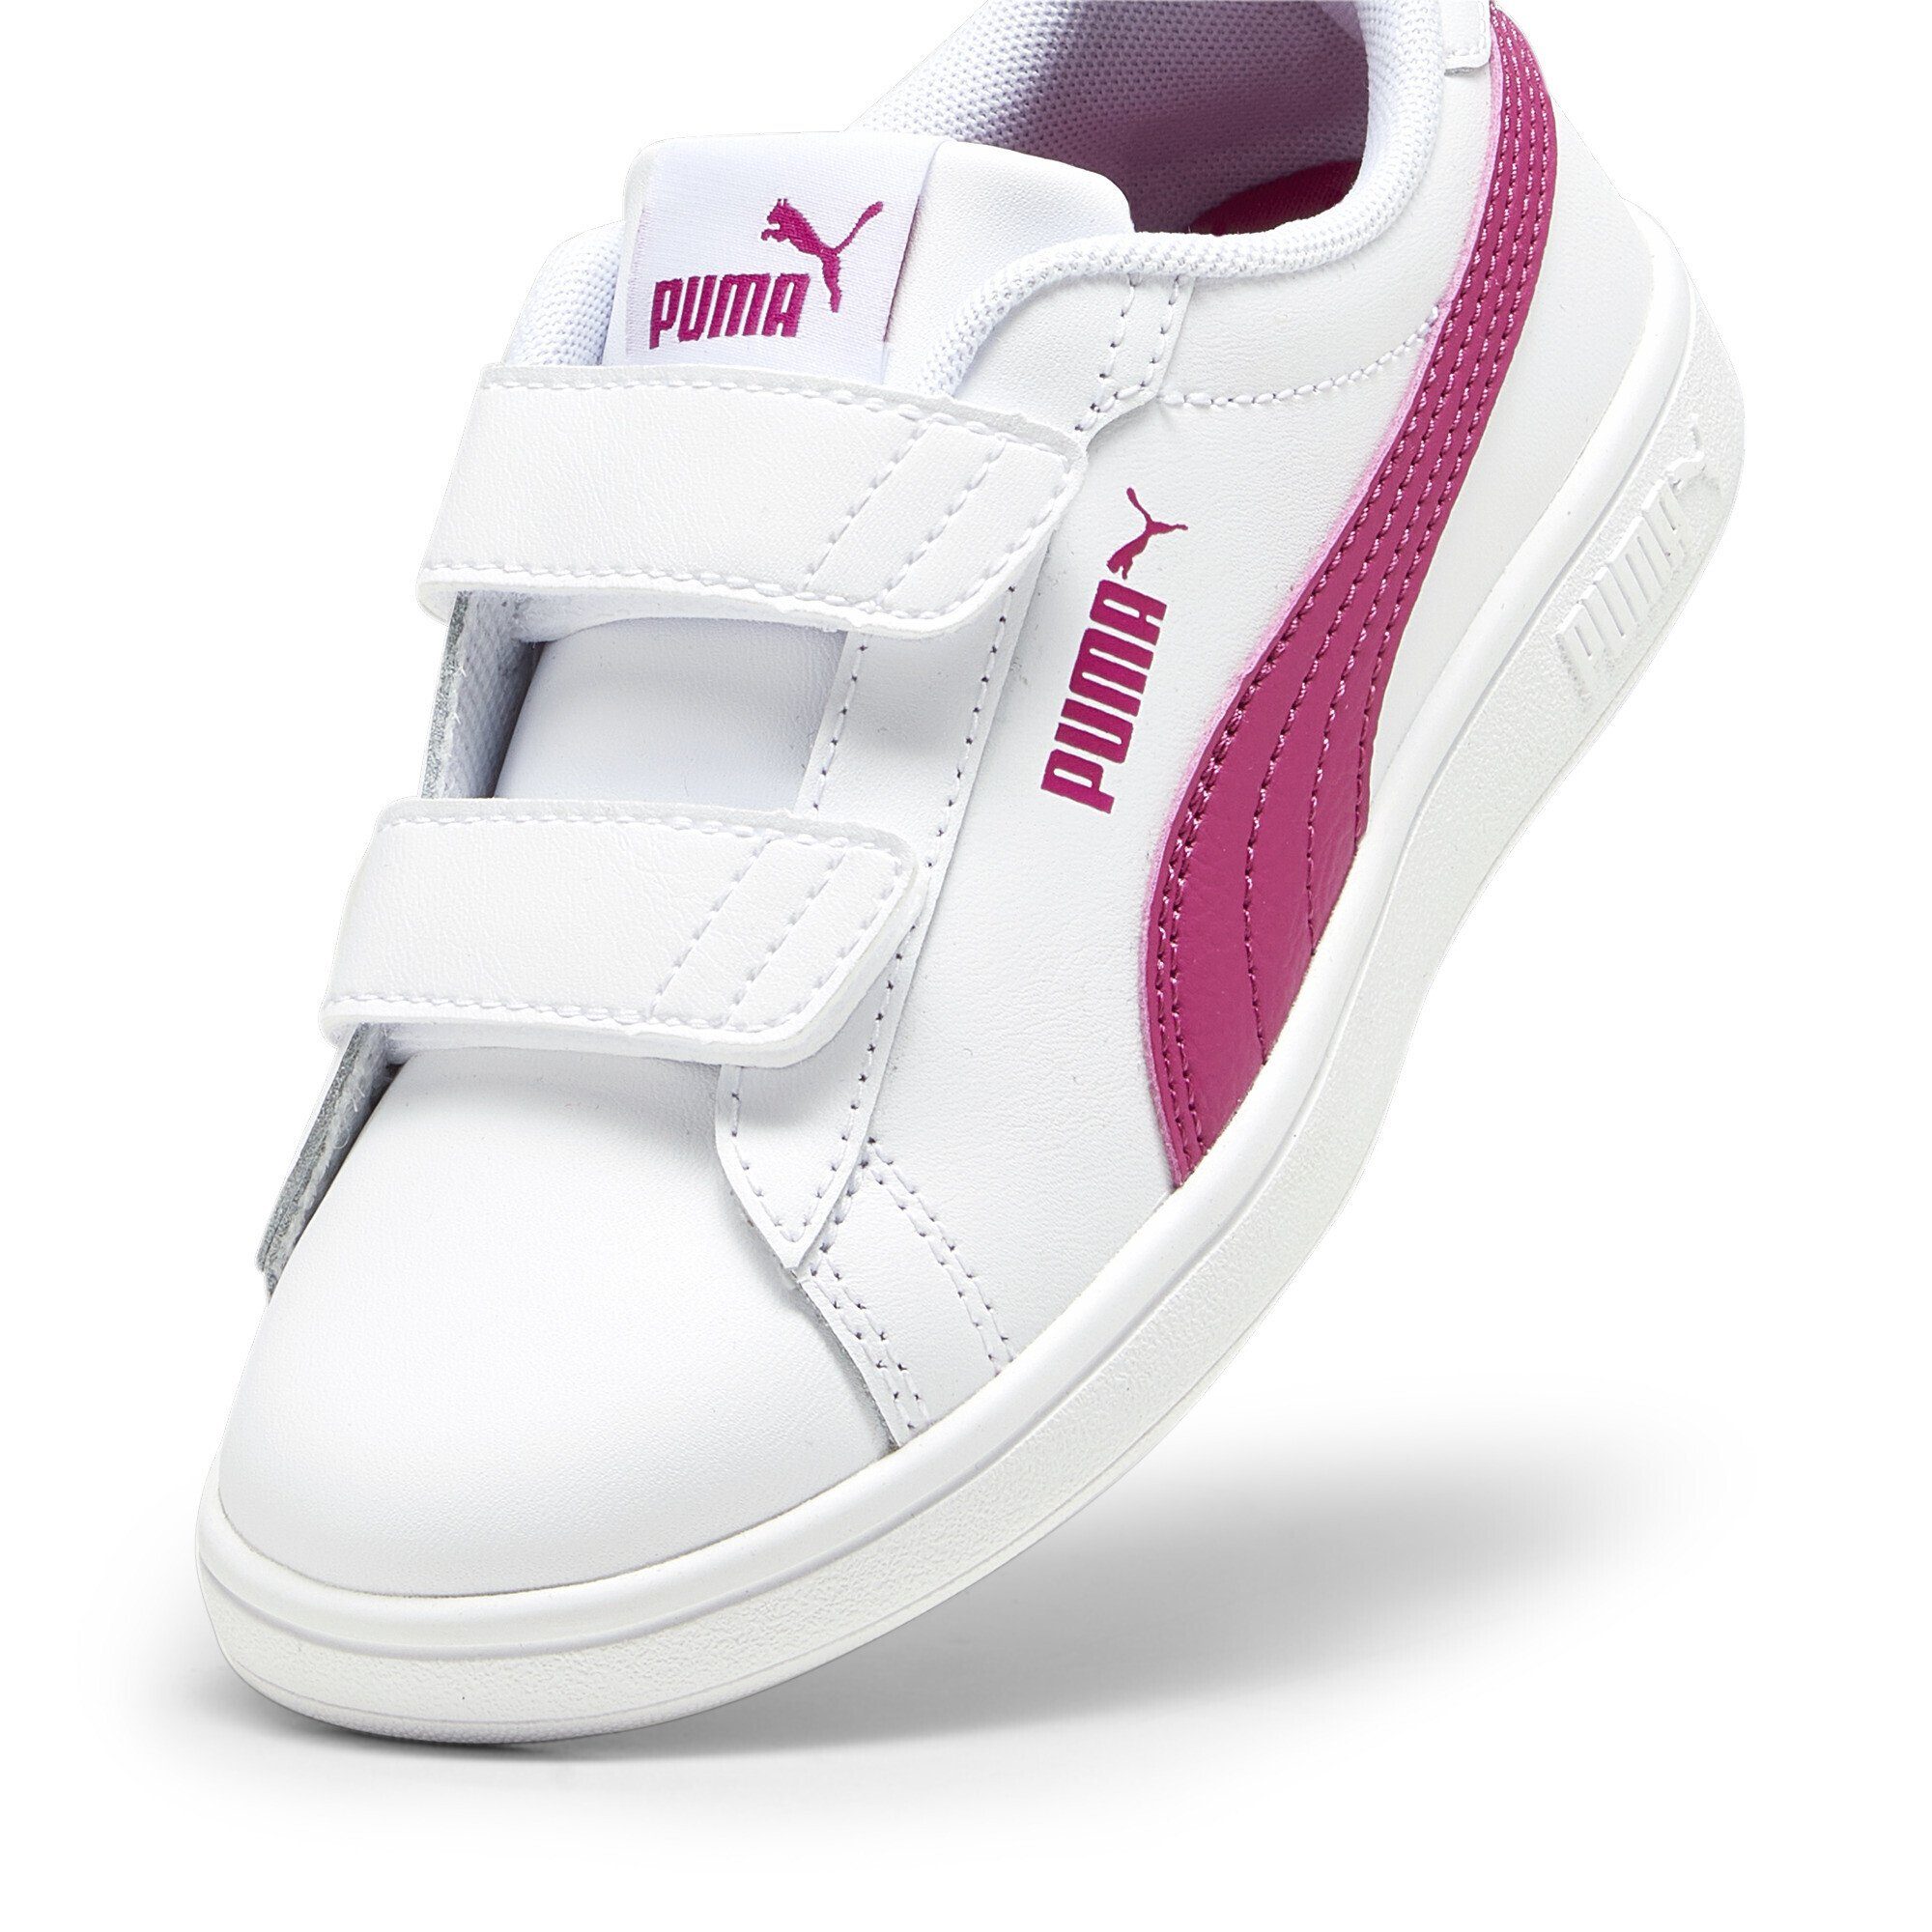 PUMA Smash 3.0 Leather Sneakers Pinktastic Sneaker White Pink